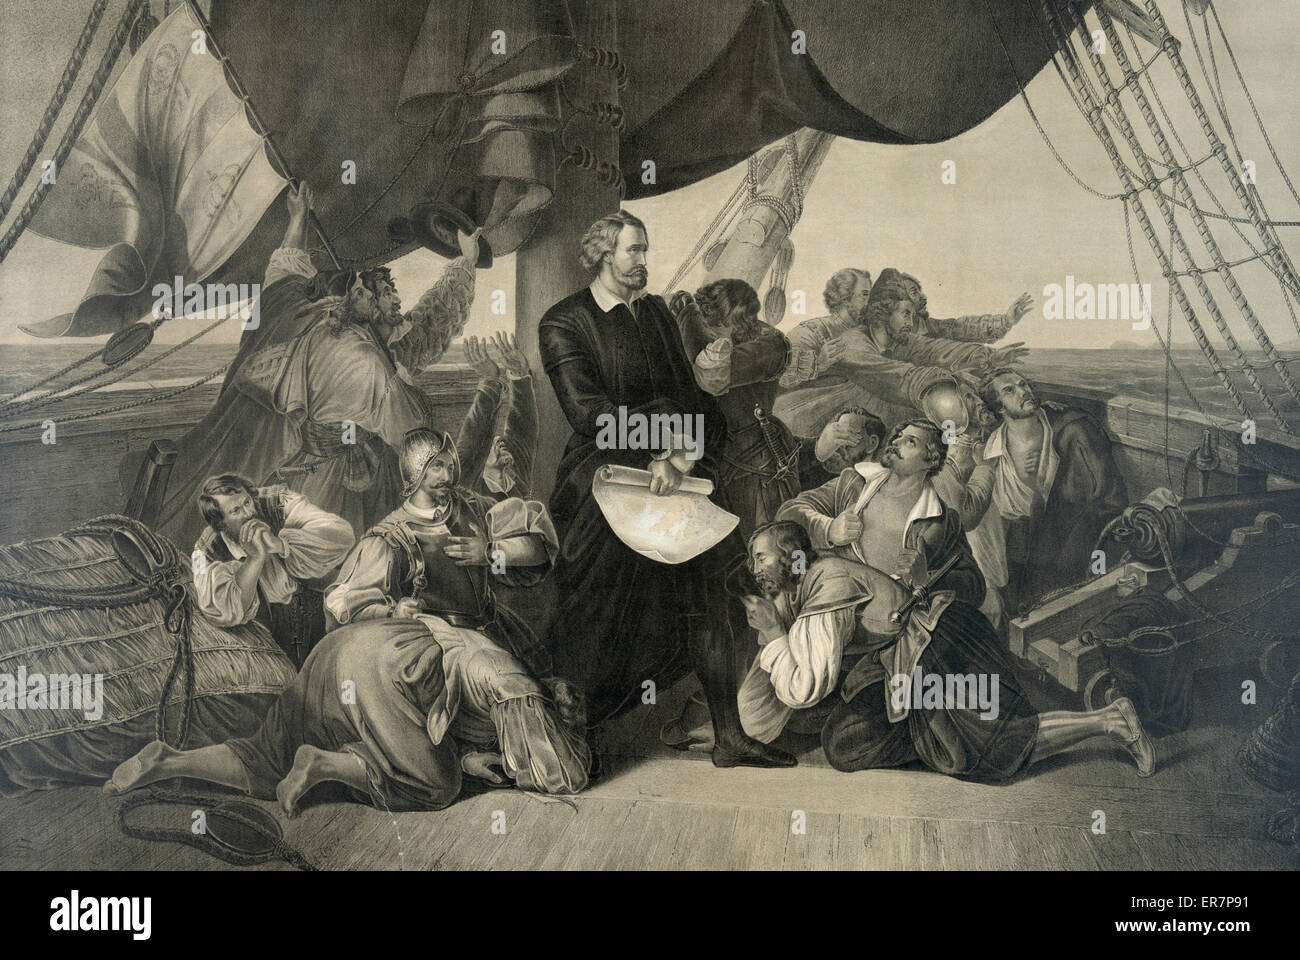 The first sight of the new world - Columbus discovering America. Print showing Columbus standing among crew aboard ship with distant view of land on the horizon. Date c1892 May 23. Stock Photo